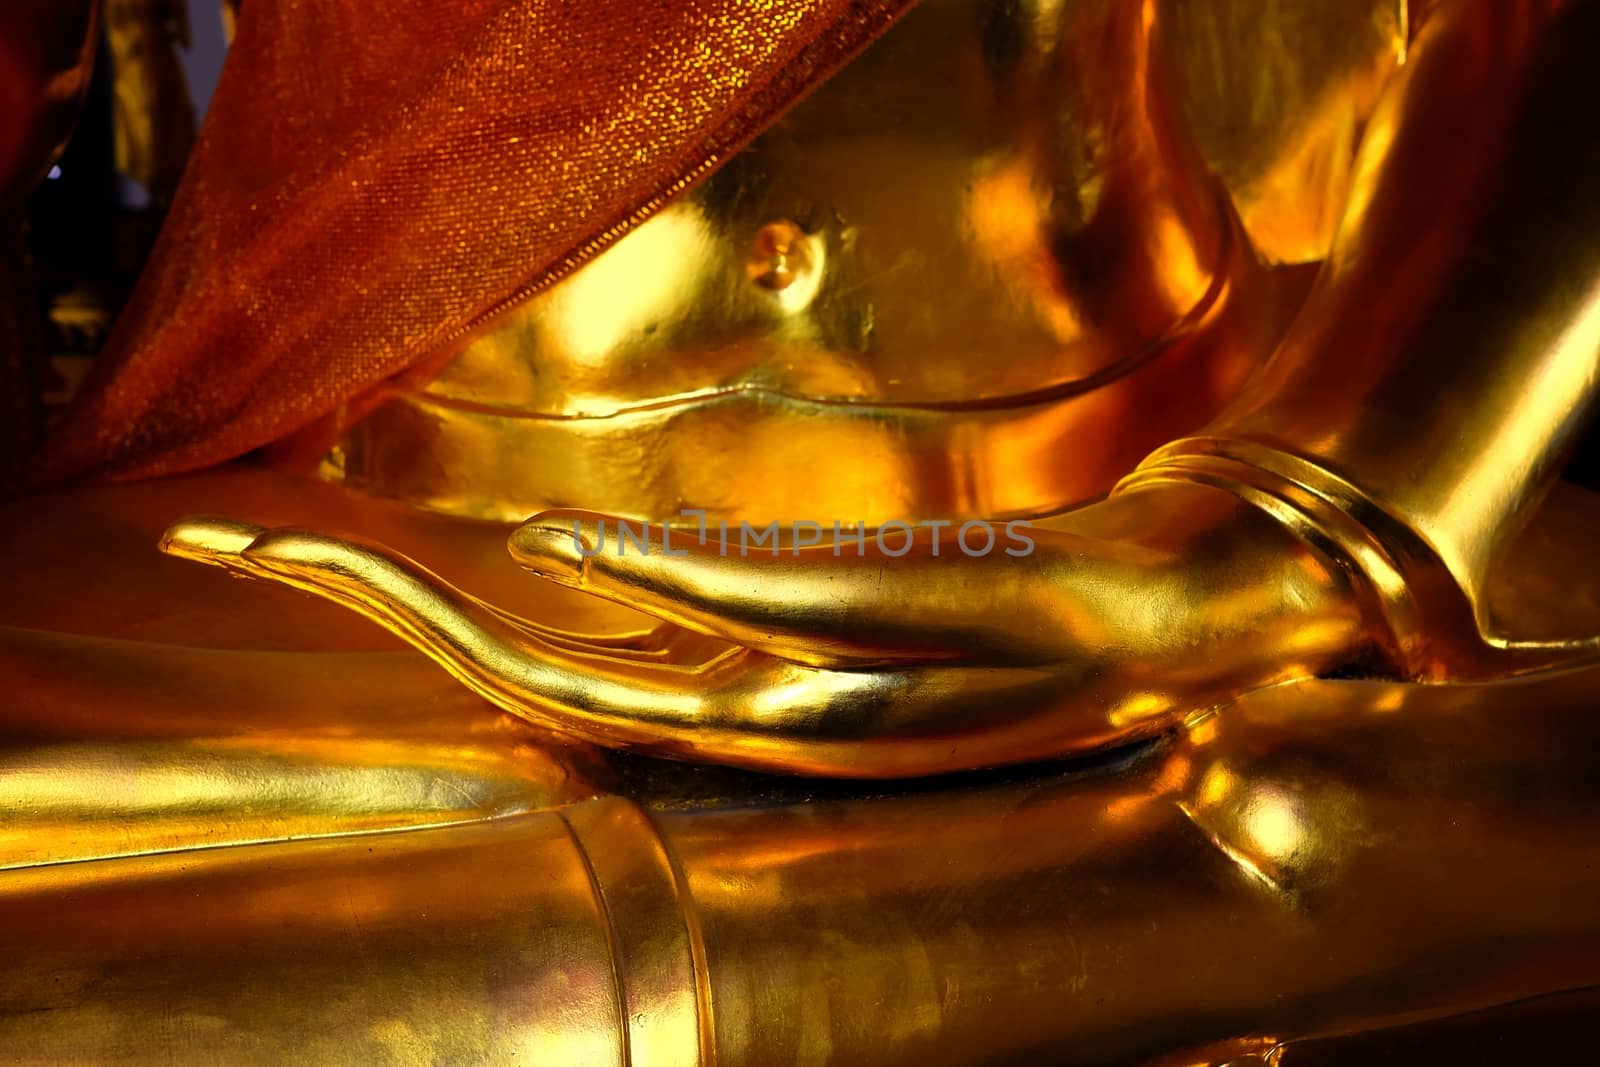 Closed-up Golden Hand of Ancient Buddha Image.